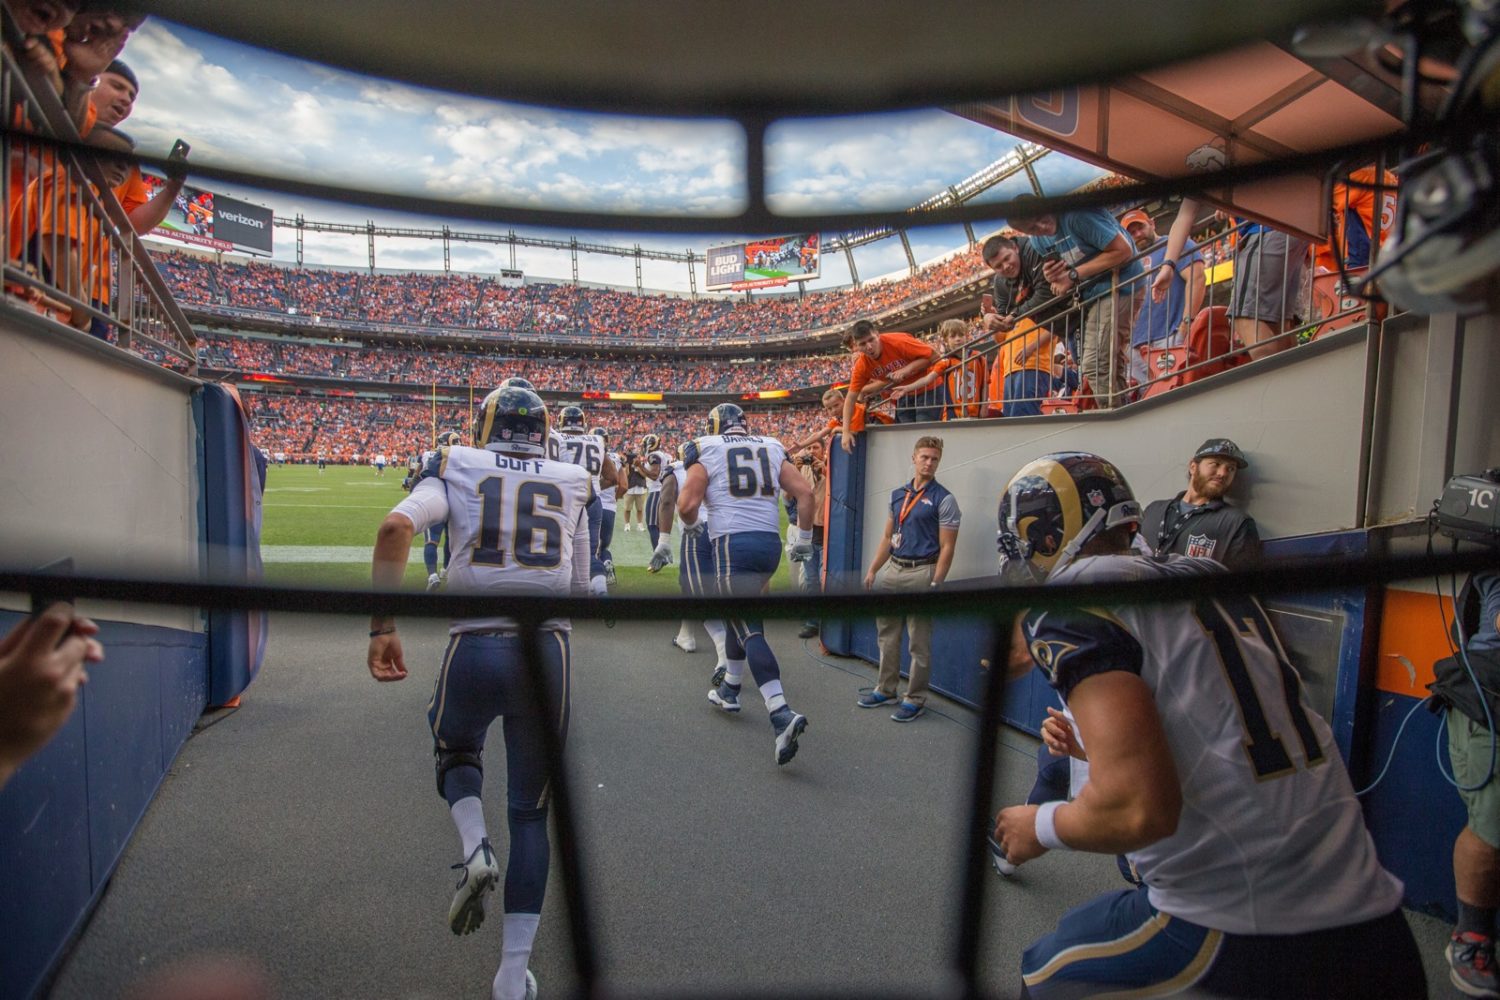 Capturing Football in Action: Photographing the L.A. Rams